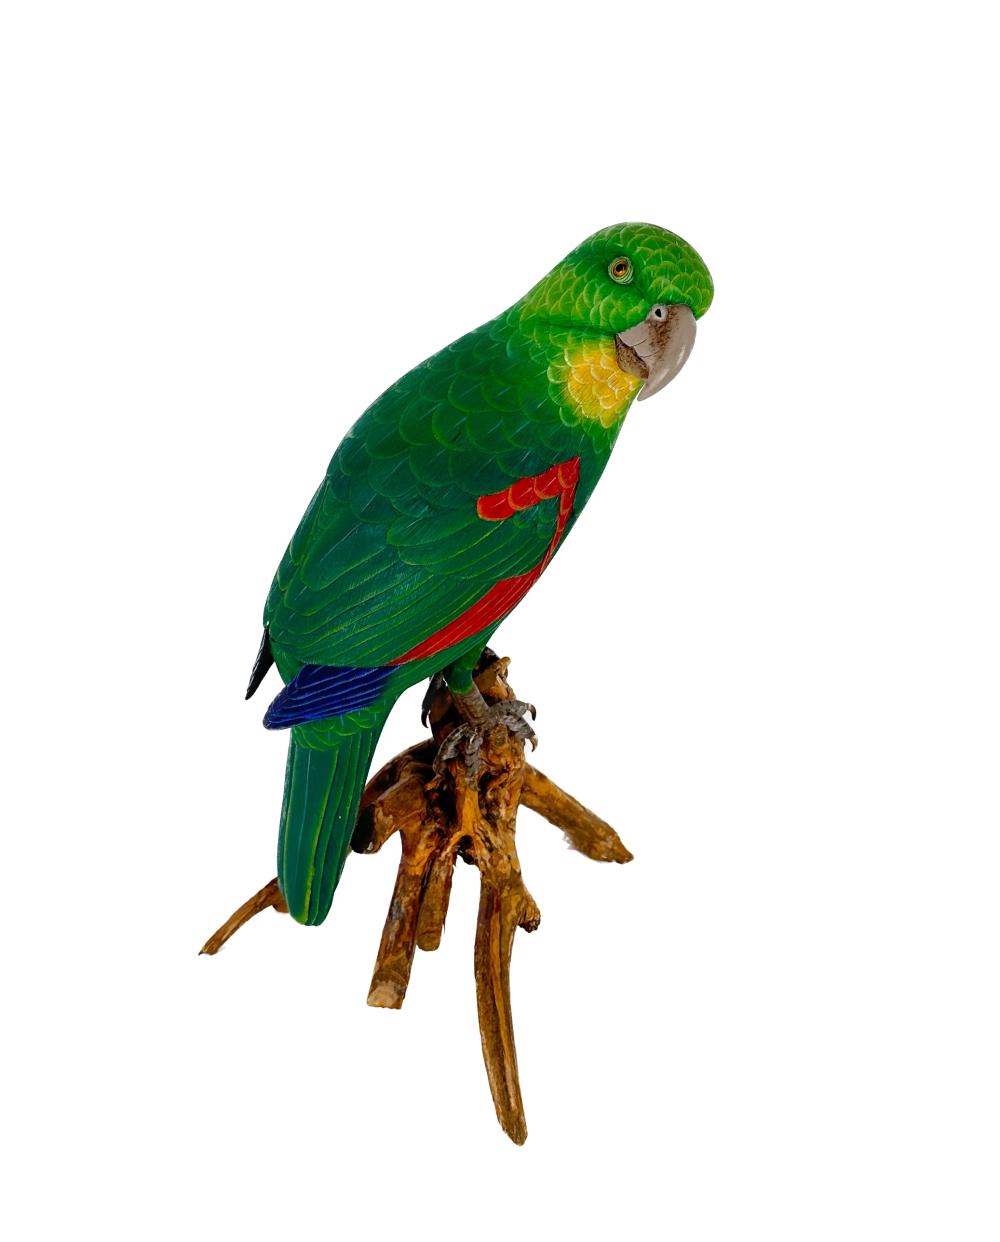 DECORATIVE CARVED WOODEN PARROT